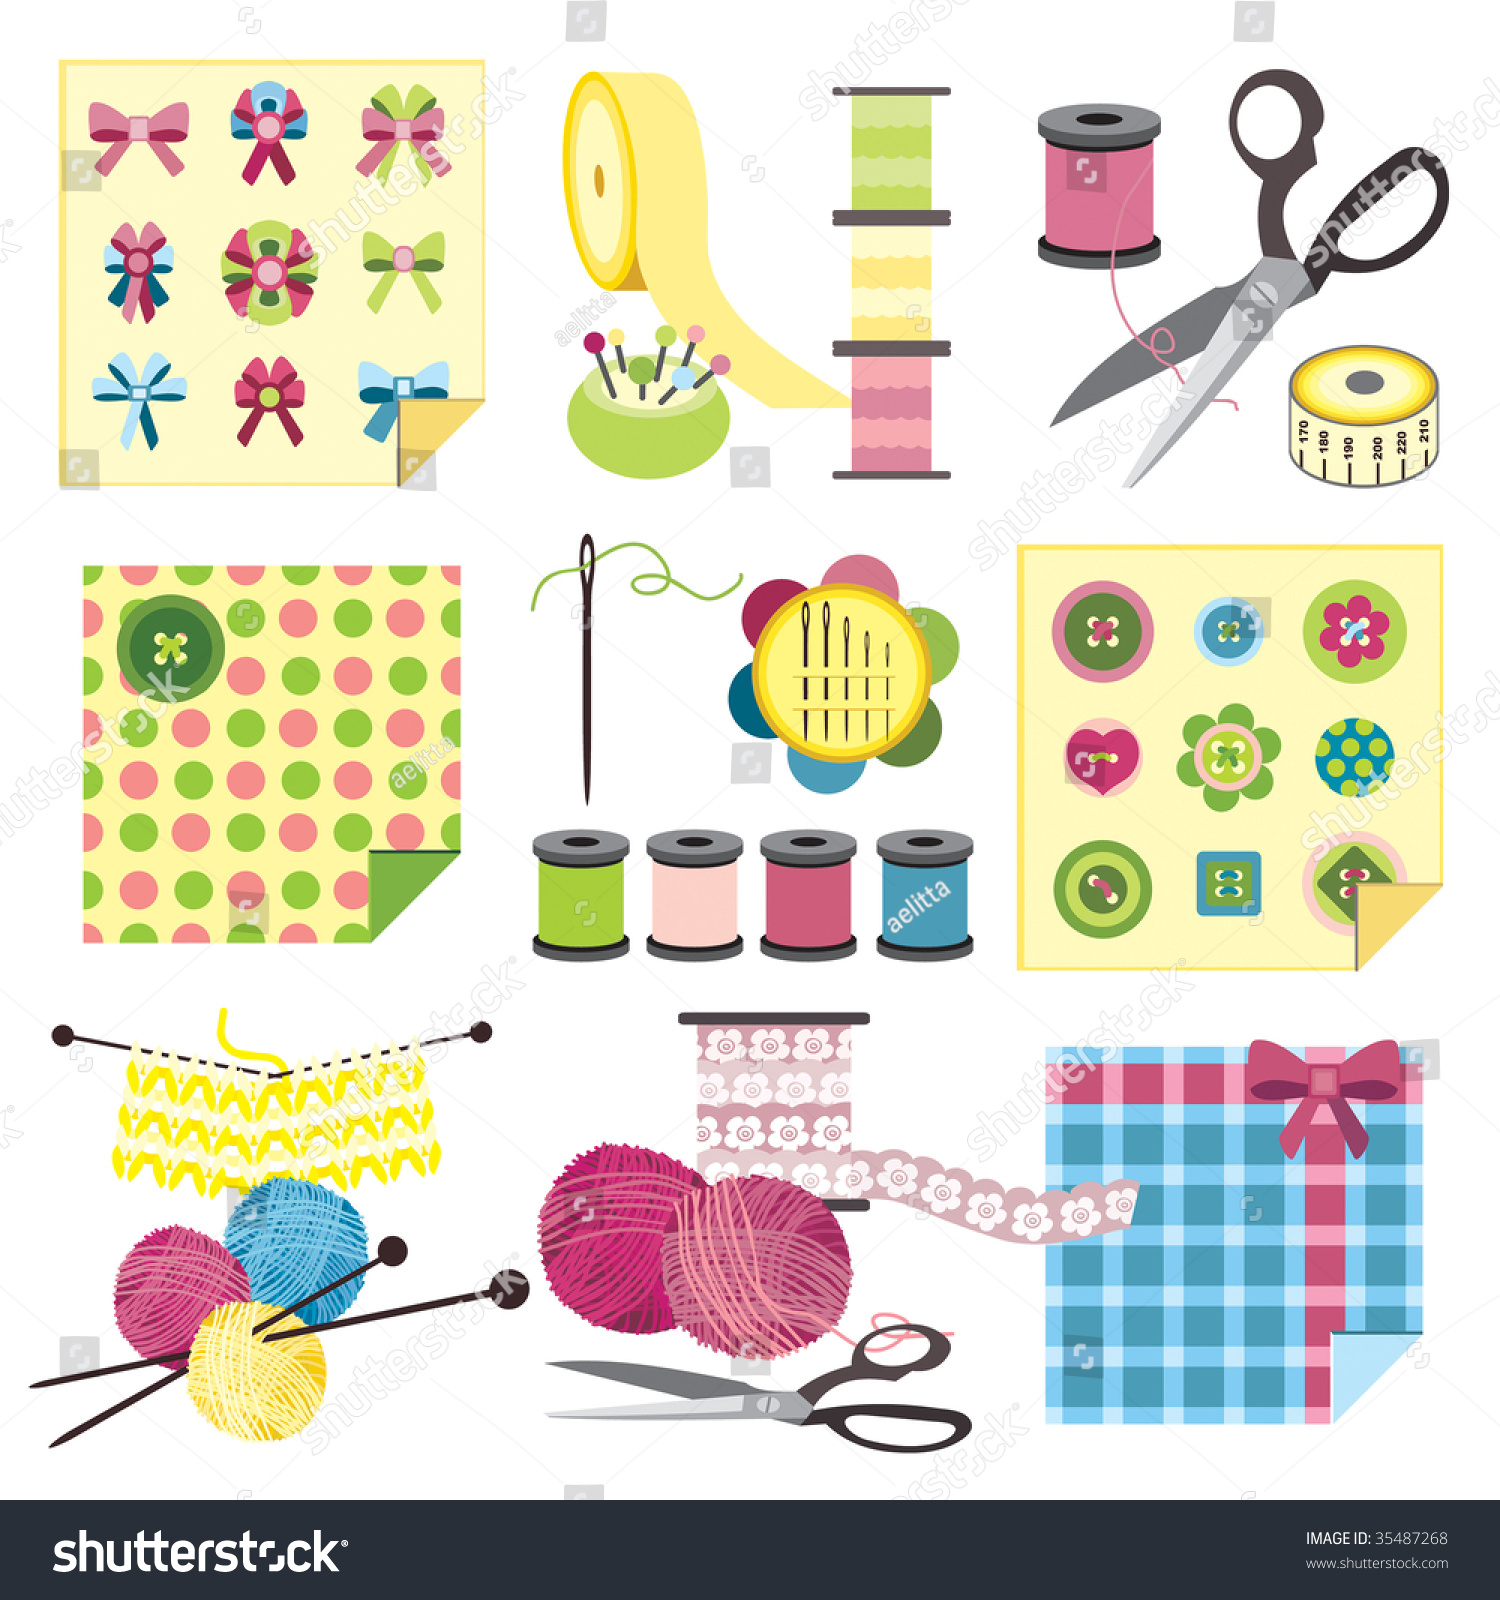 Craft Icons - Sewing Icons For Sewing, Knitting, Crafts, Hobbies Stock ...